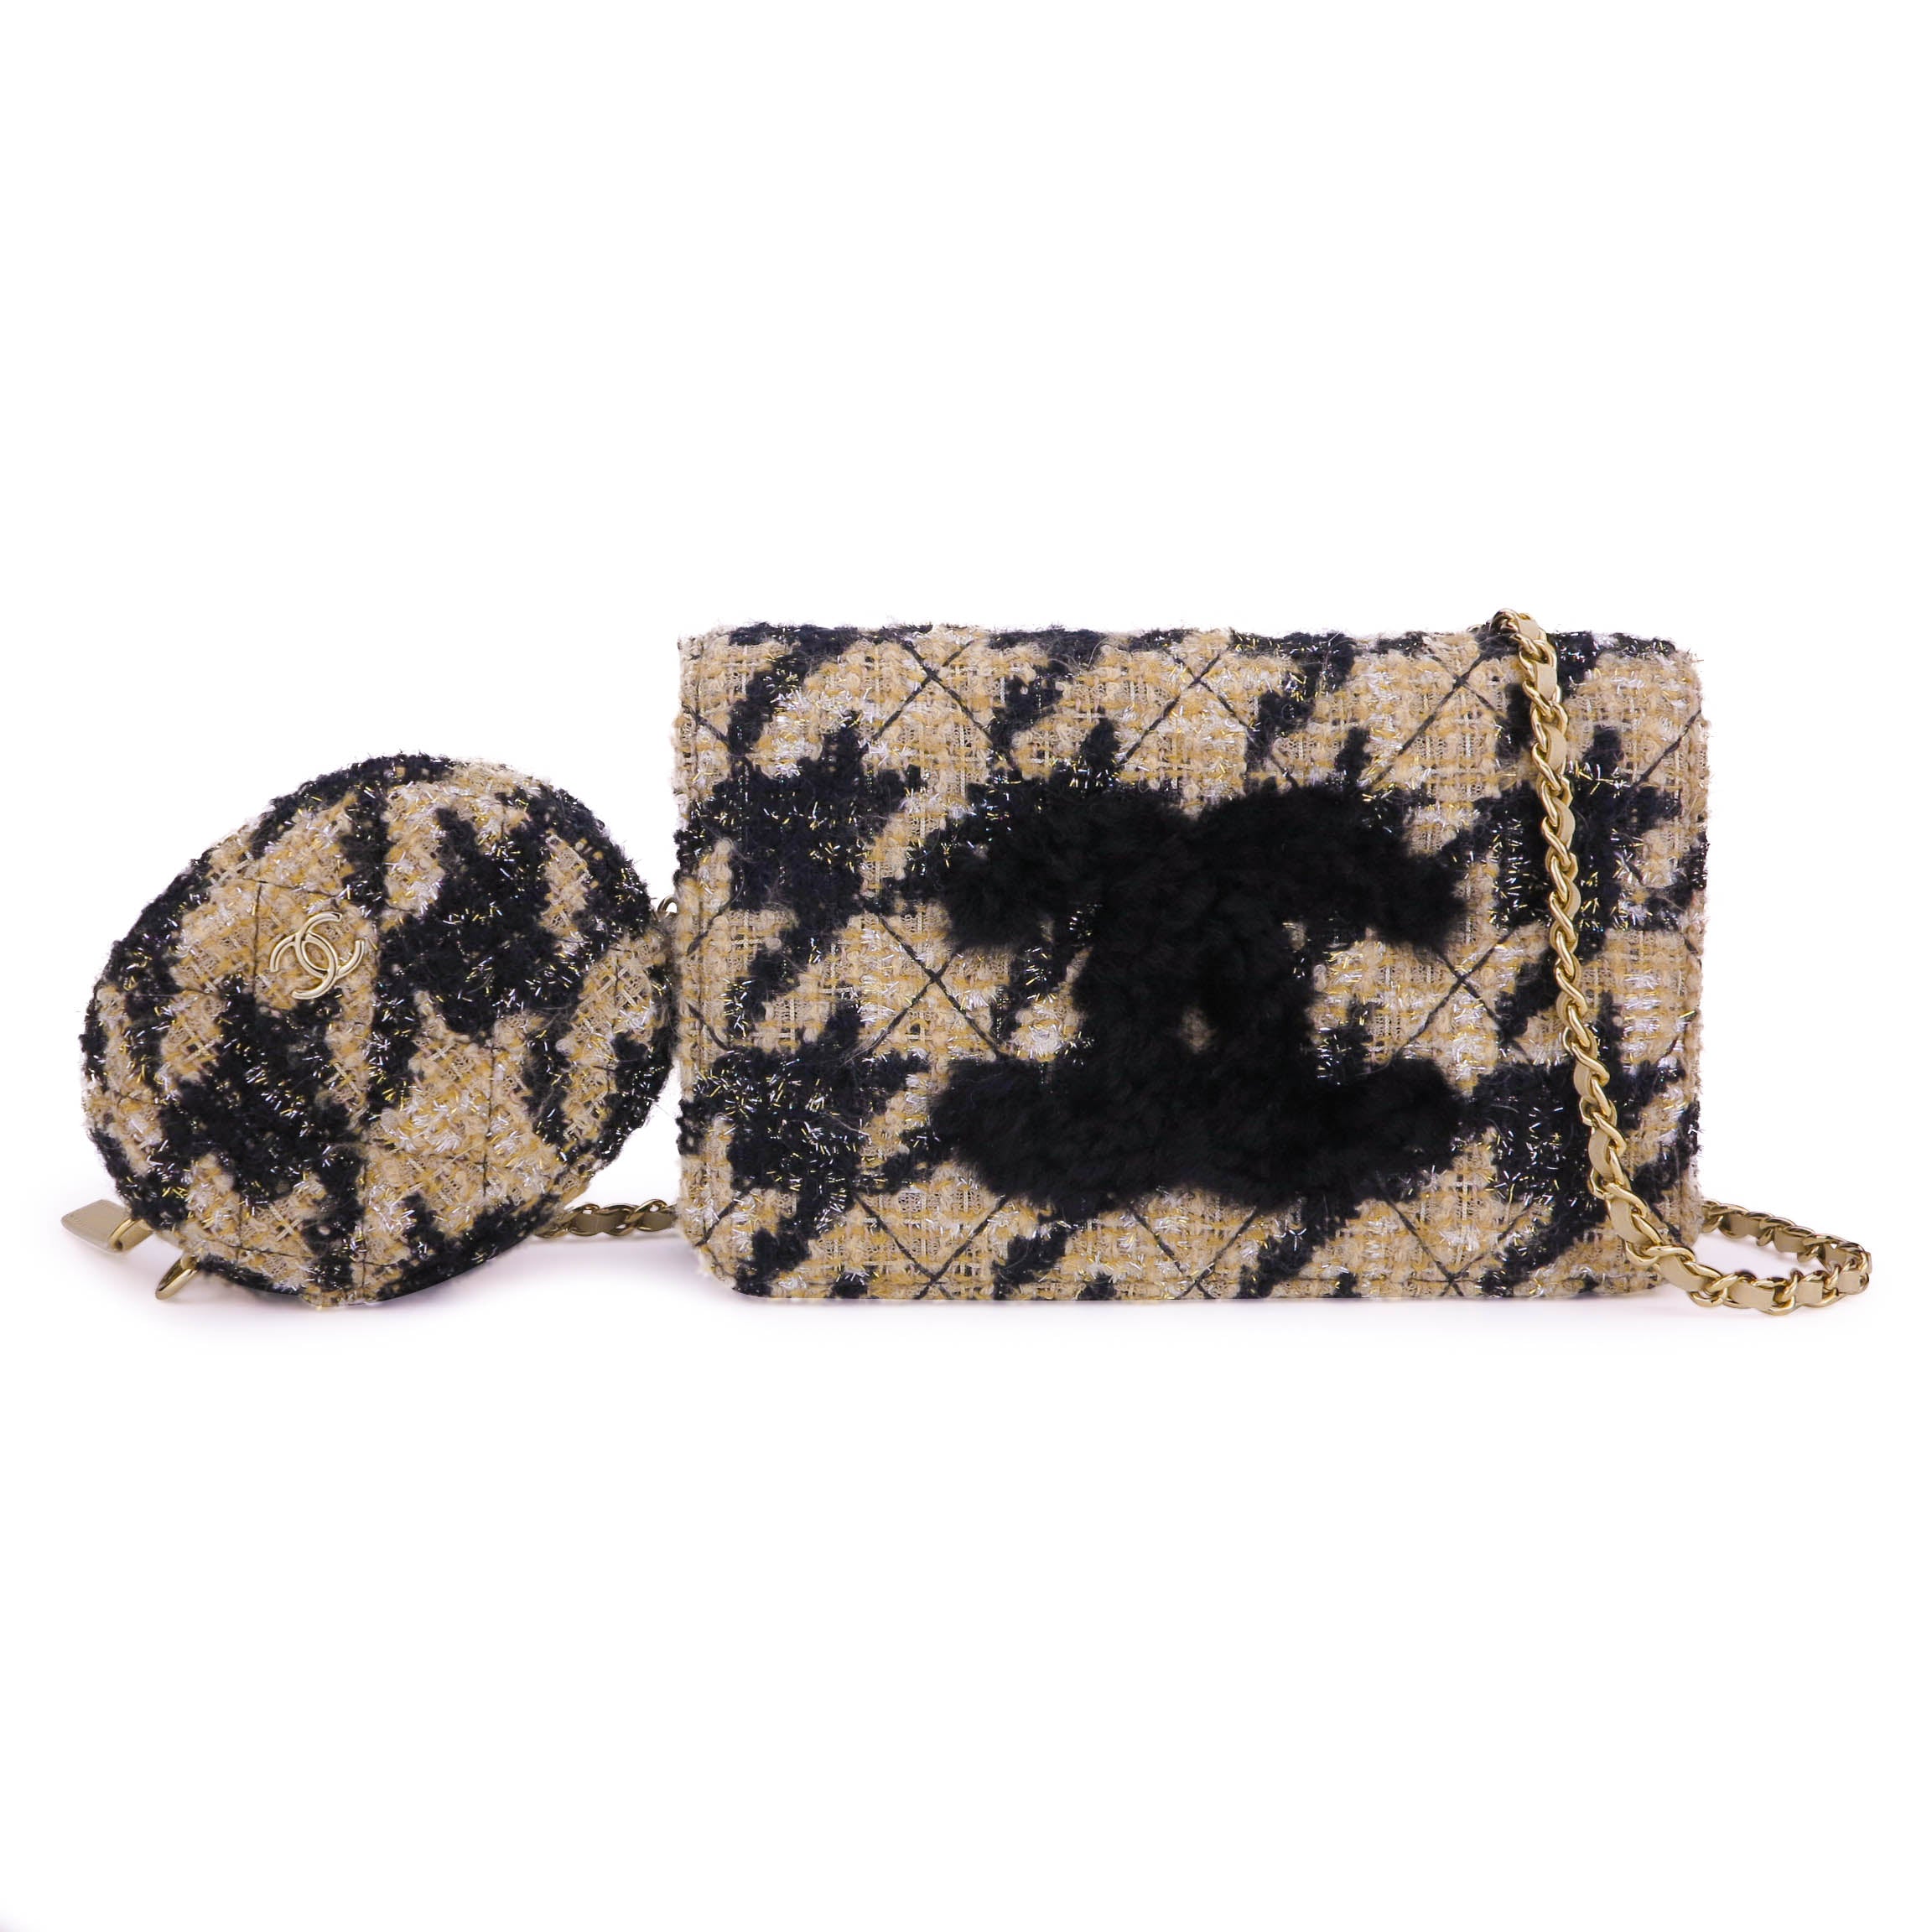 CHANEL 19K Houndstooth Tweed 19 Small Beige/Black #28726596 *New